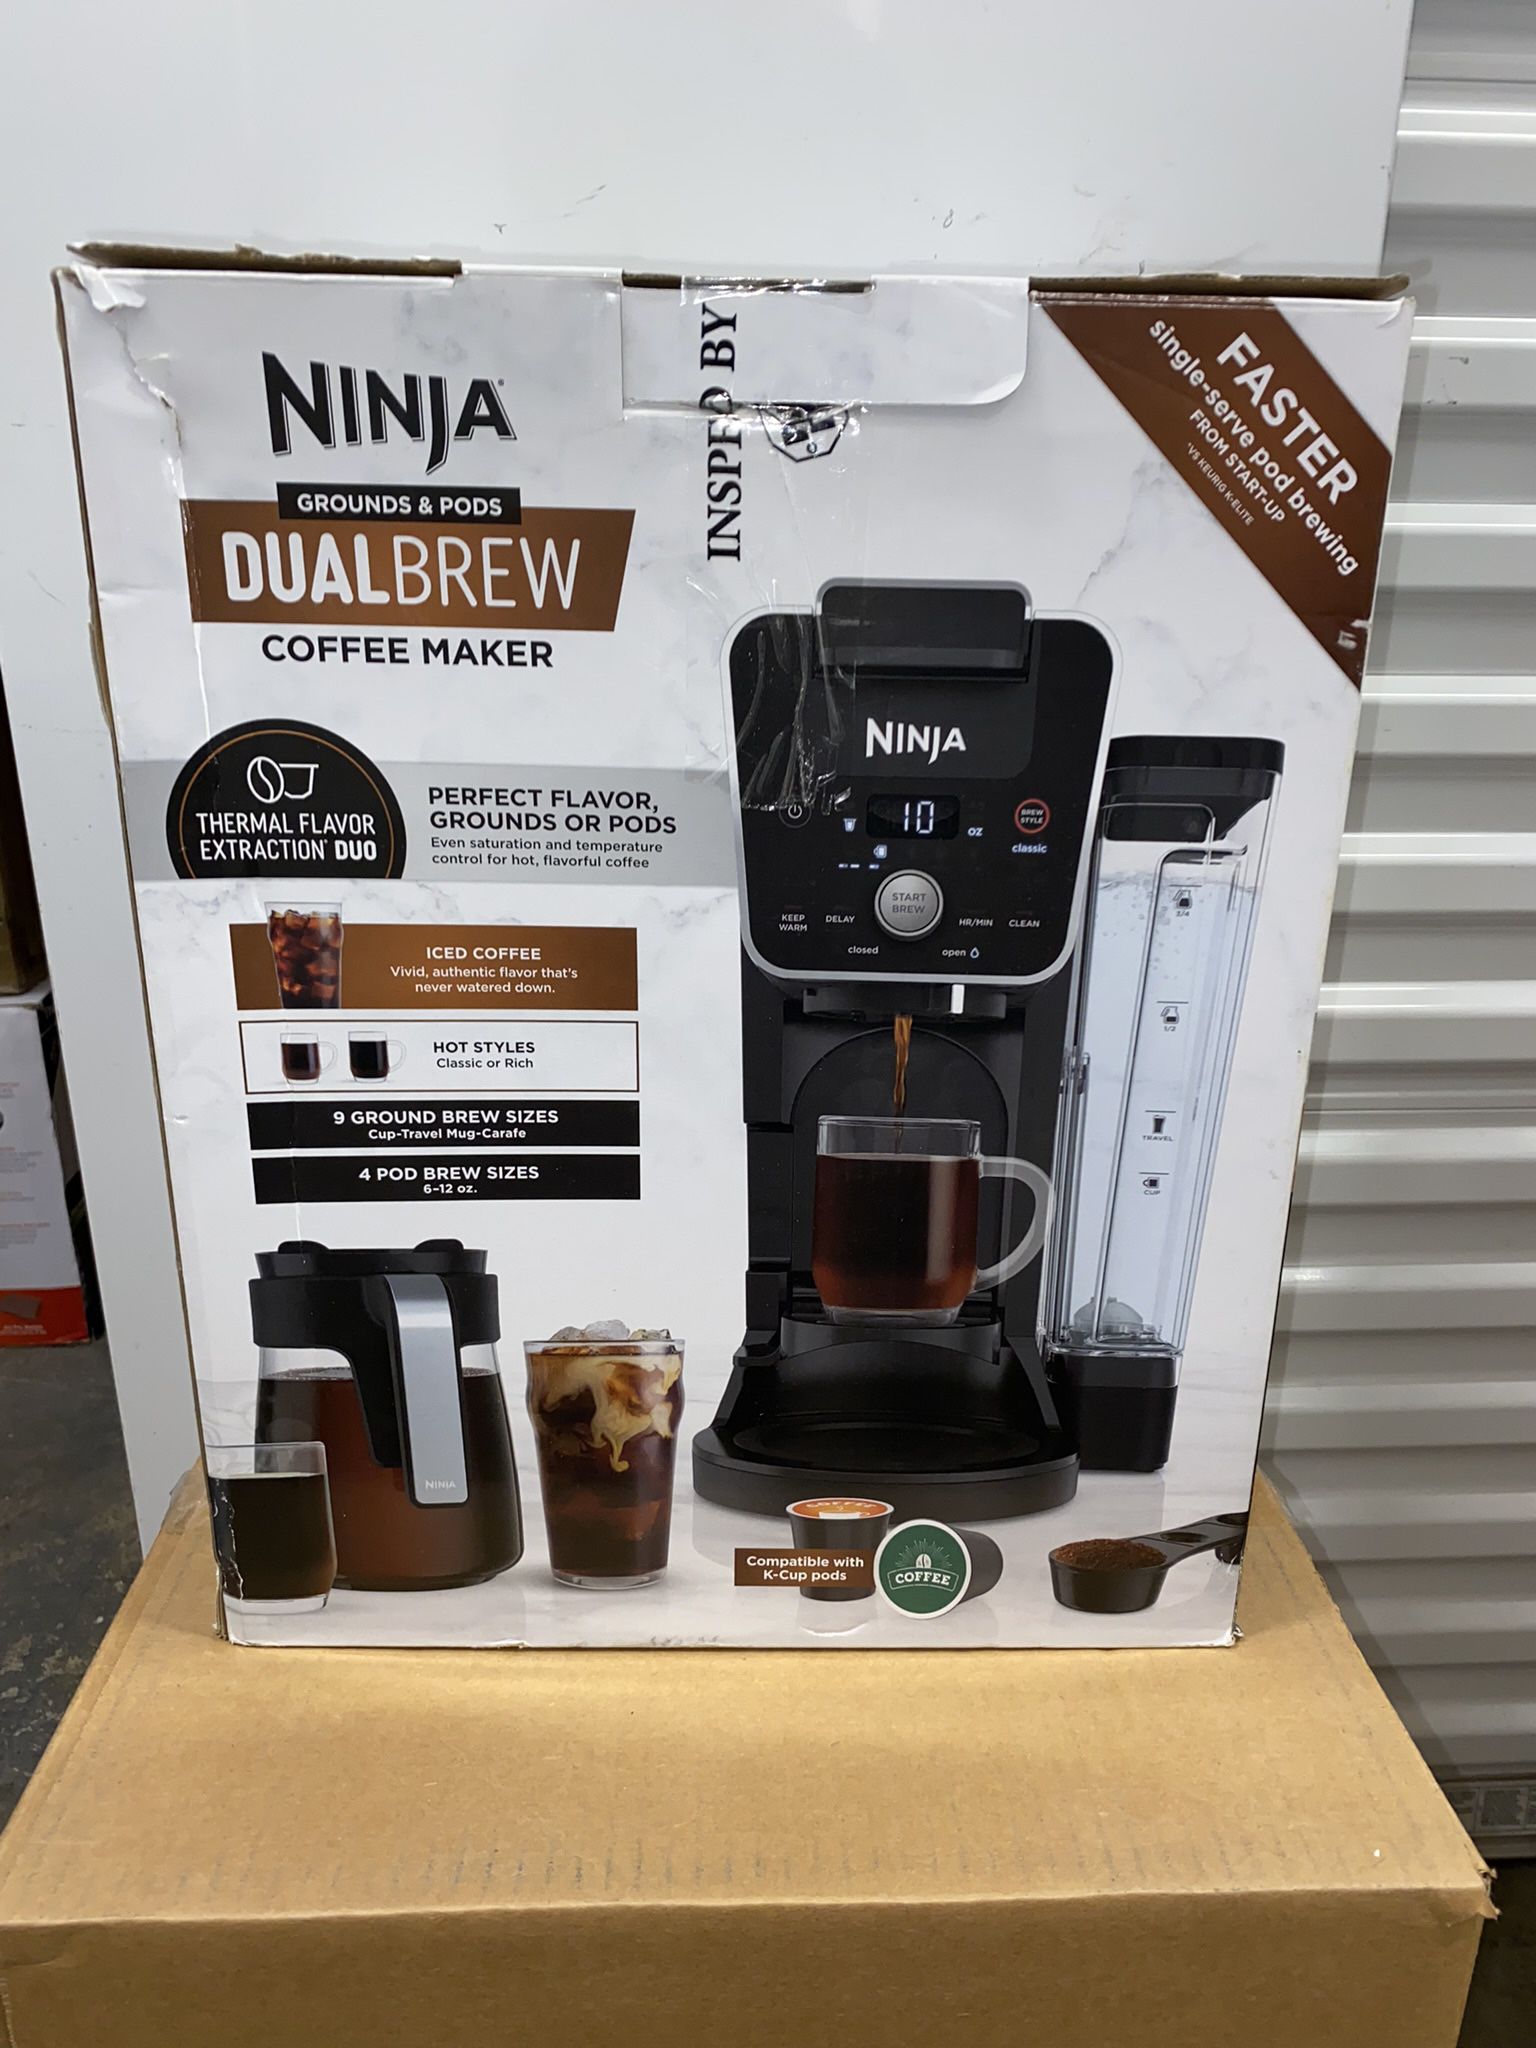 Ninja Grounds & Pods Dual Brew Coffee Maker for Sale in Brooklyn